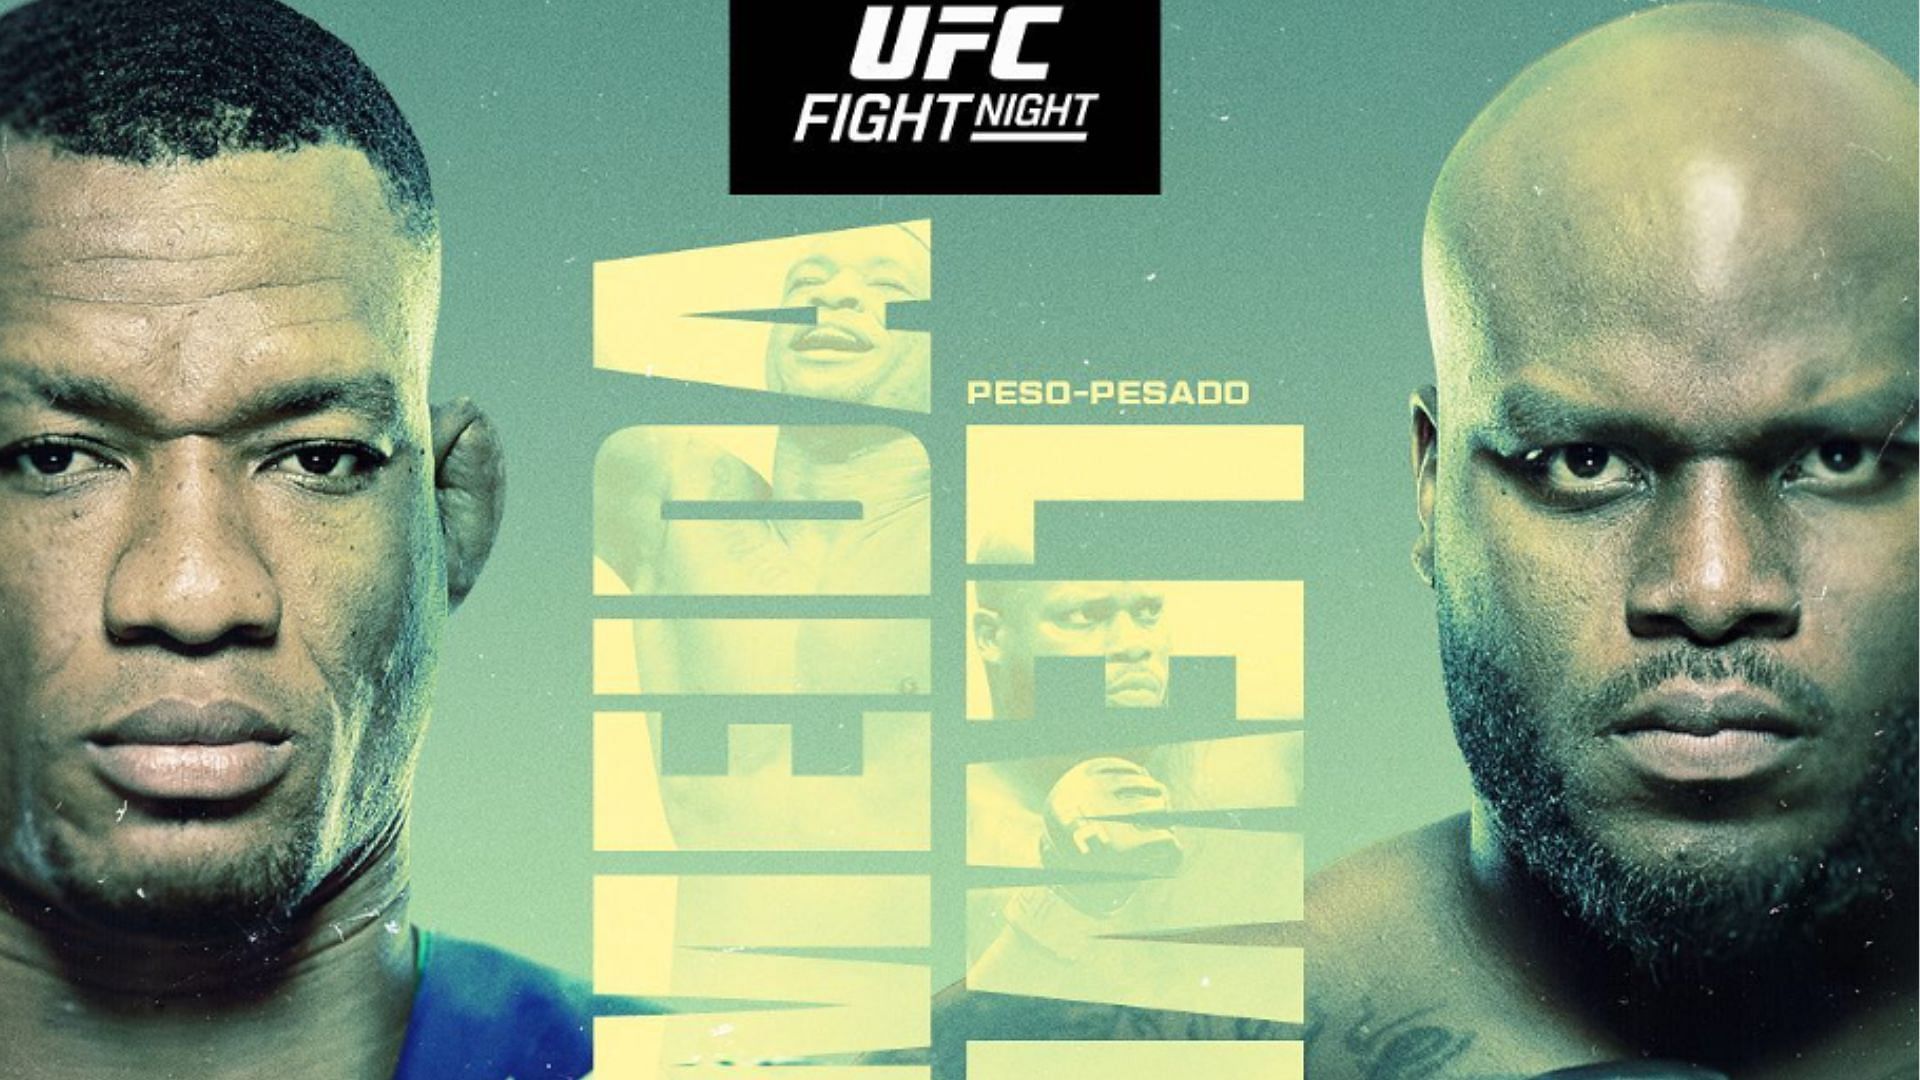 UFC Sao Paulo Fight Poster [Image courtesy of @ufc on Instagram]